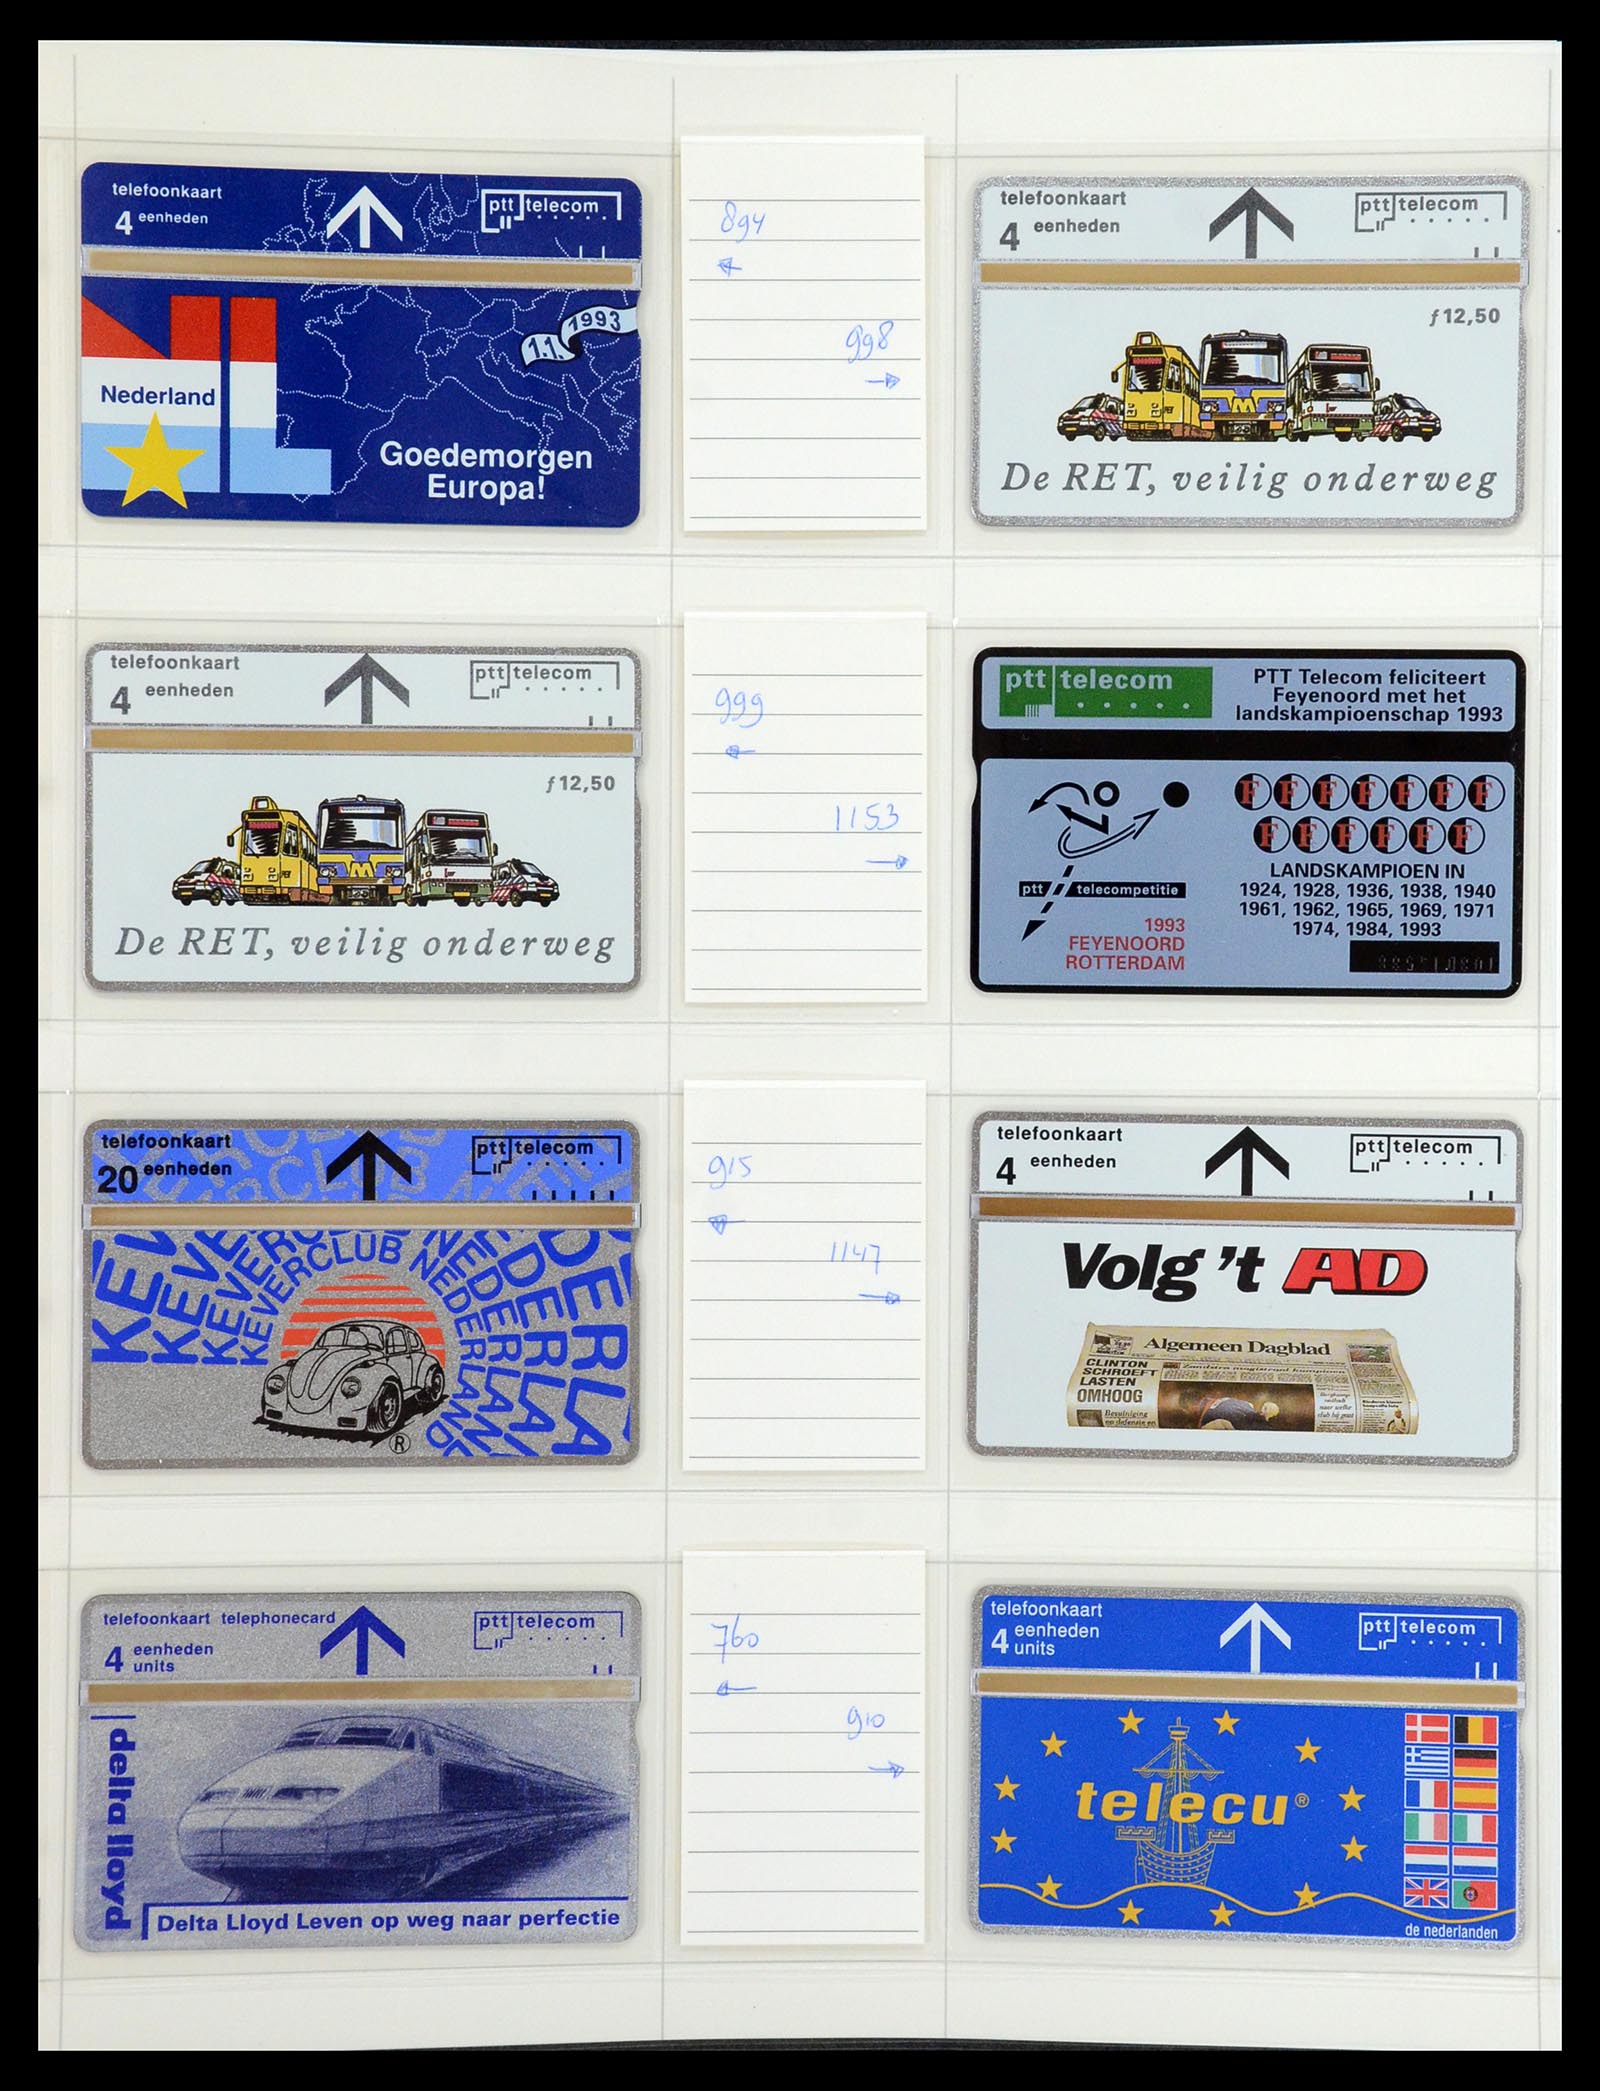 35839 057 - Stamp Collection 35839 Netherlands phonecards 1986-2002.